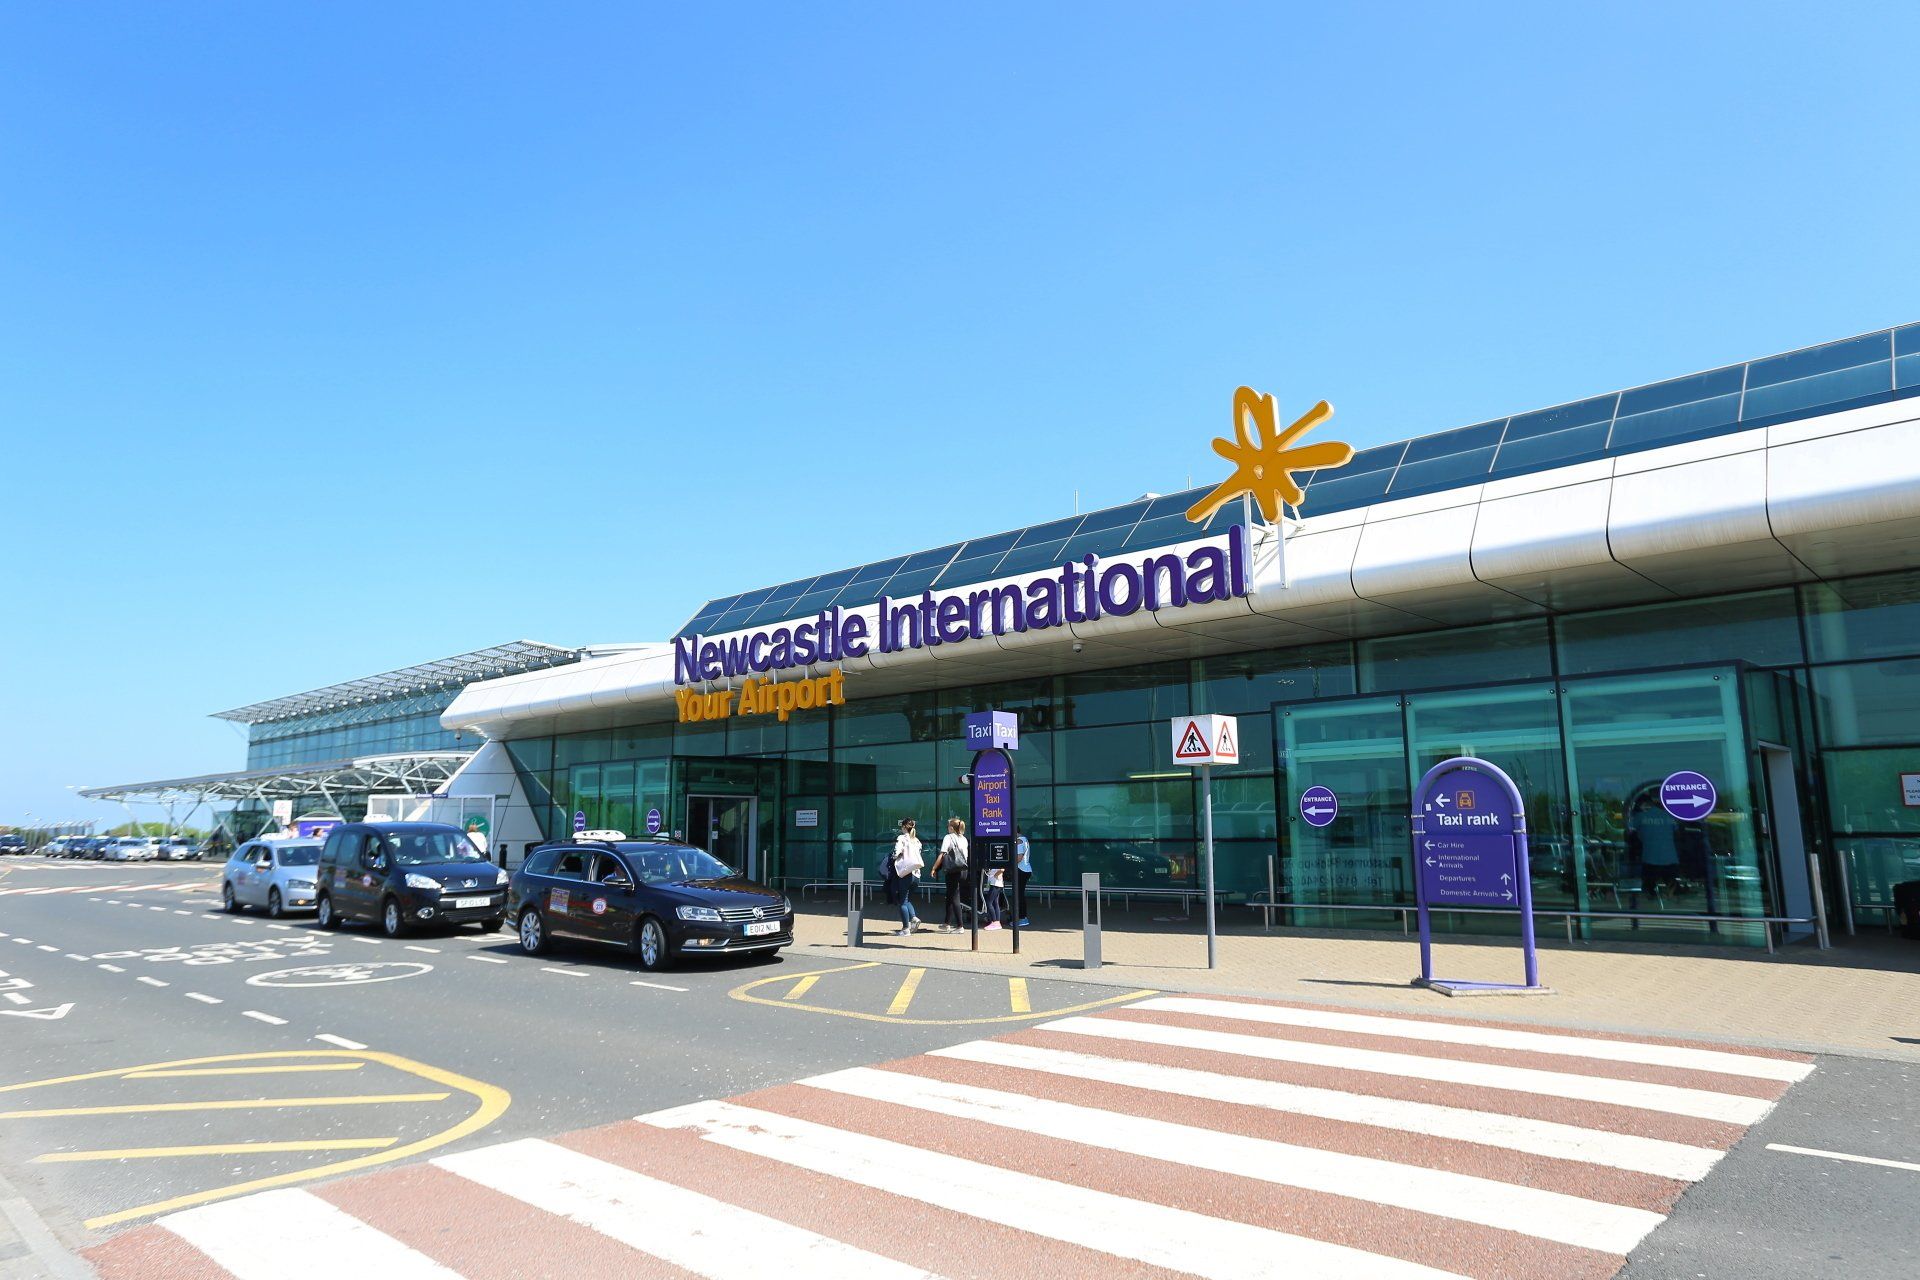 Entrance to Newcastle Airport